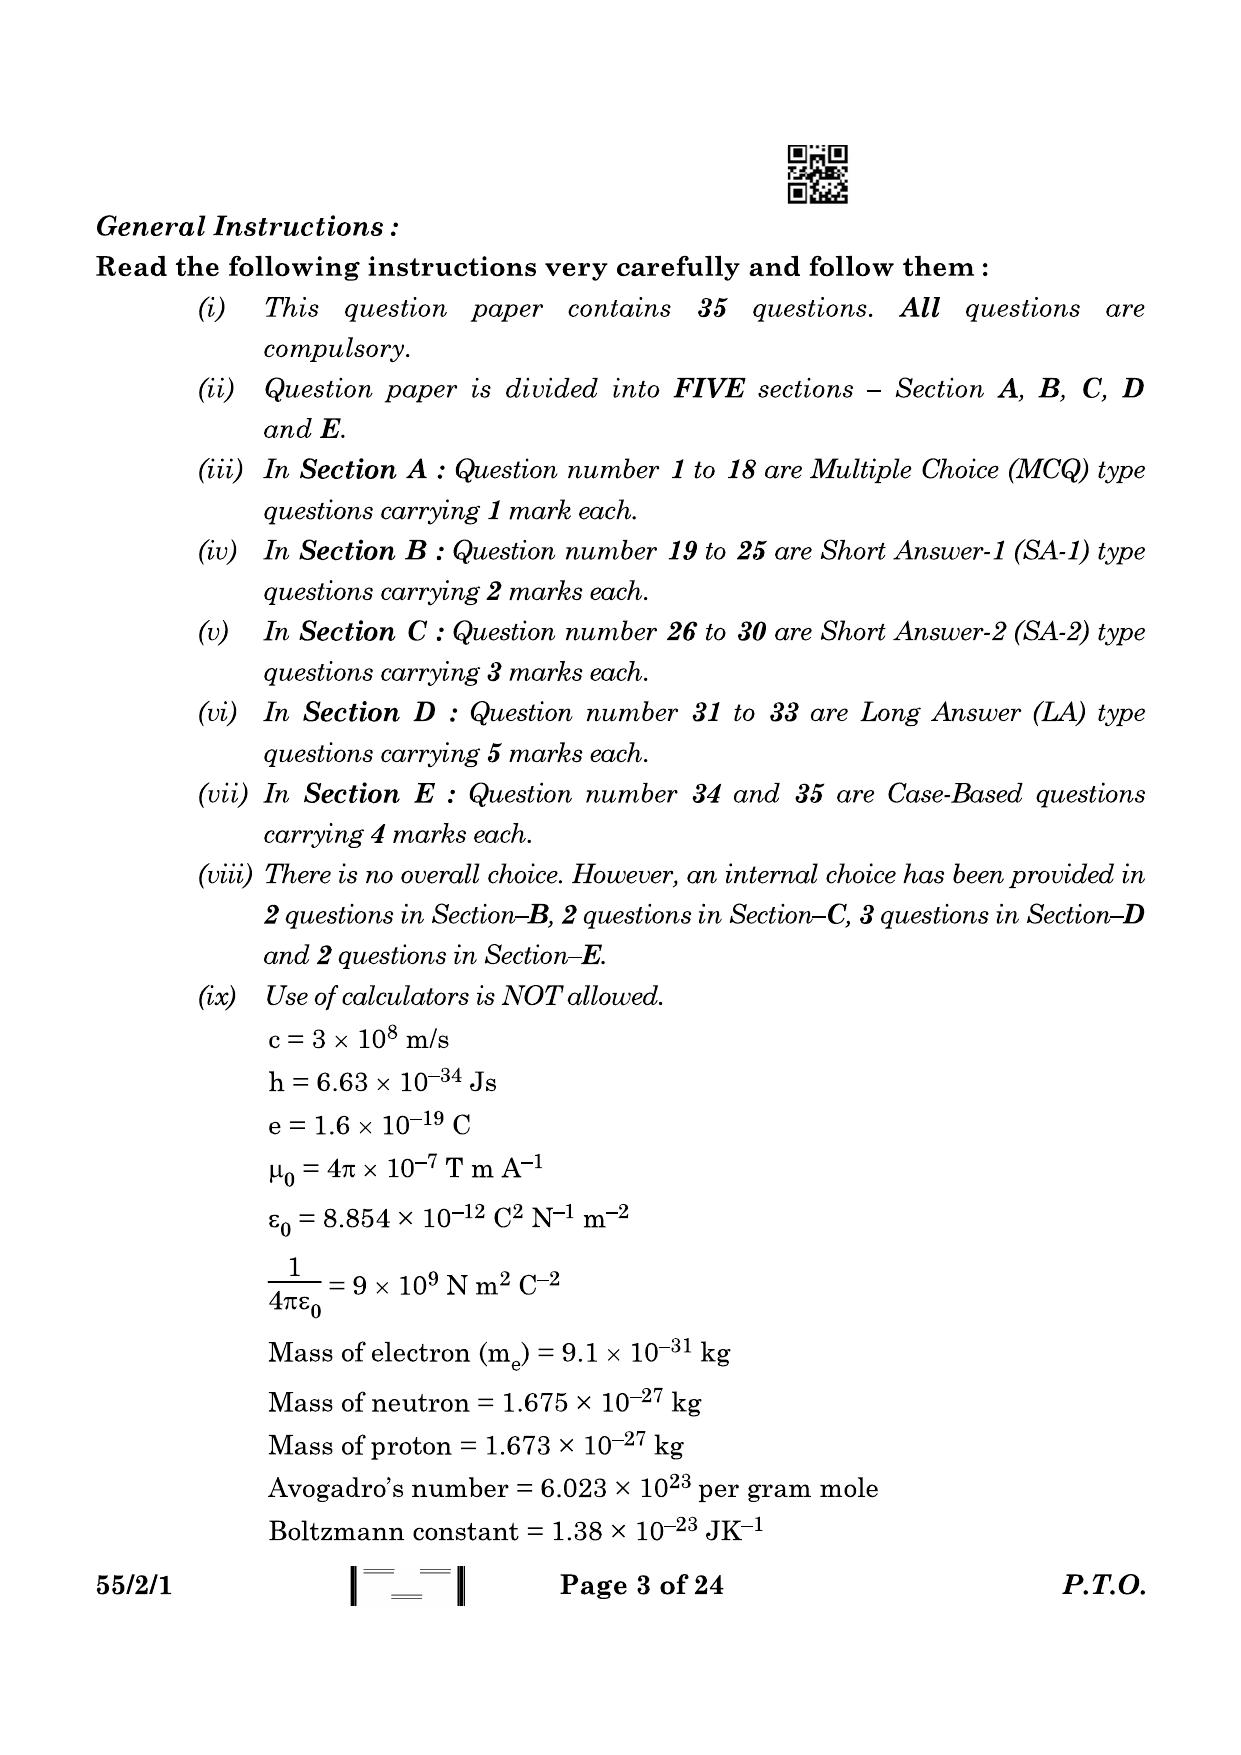 CBSE Class 12 55-2-1 Physics 2023 Question Paper - Page 3